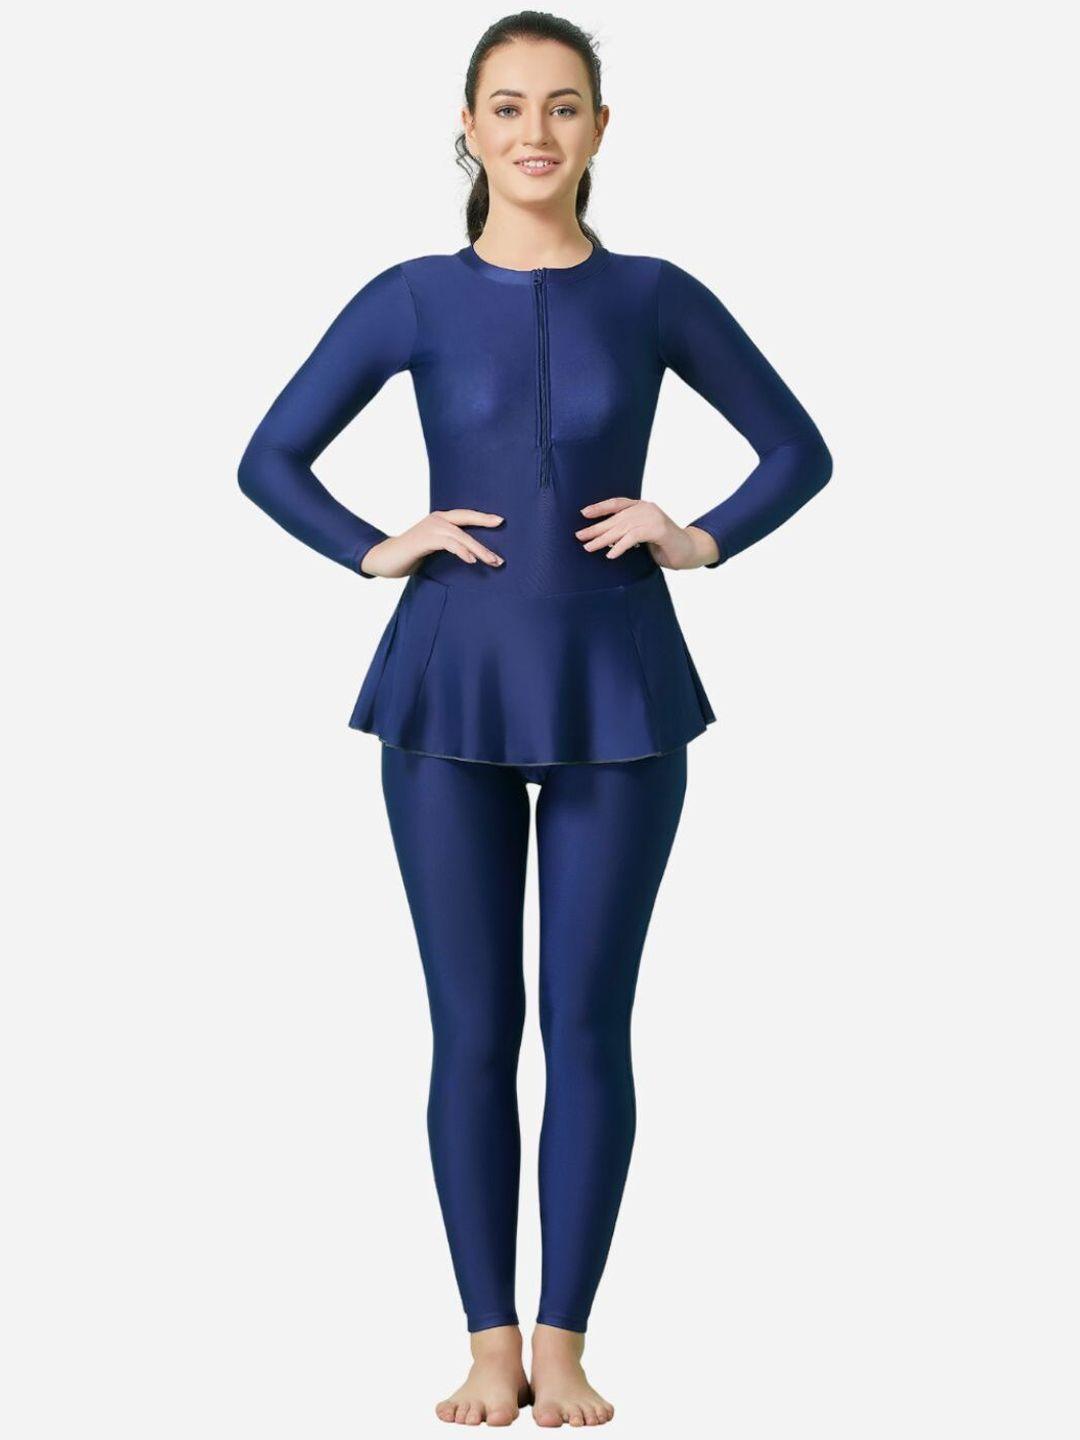 veloz swimming dress with attached tights